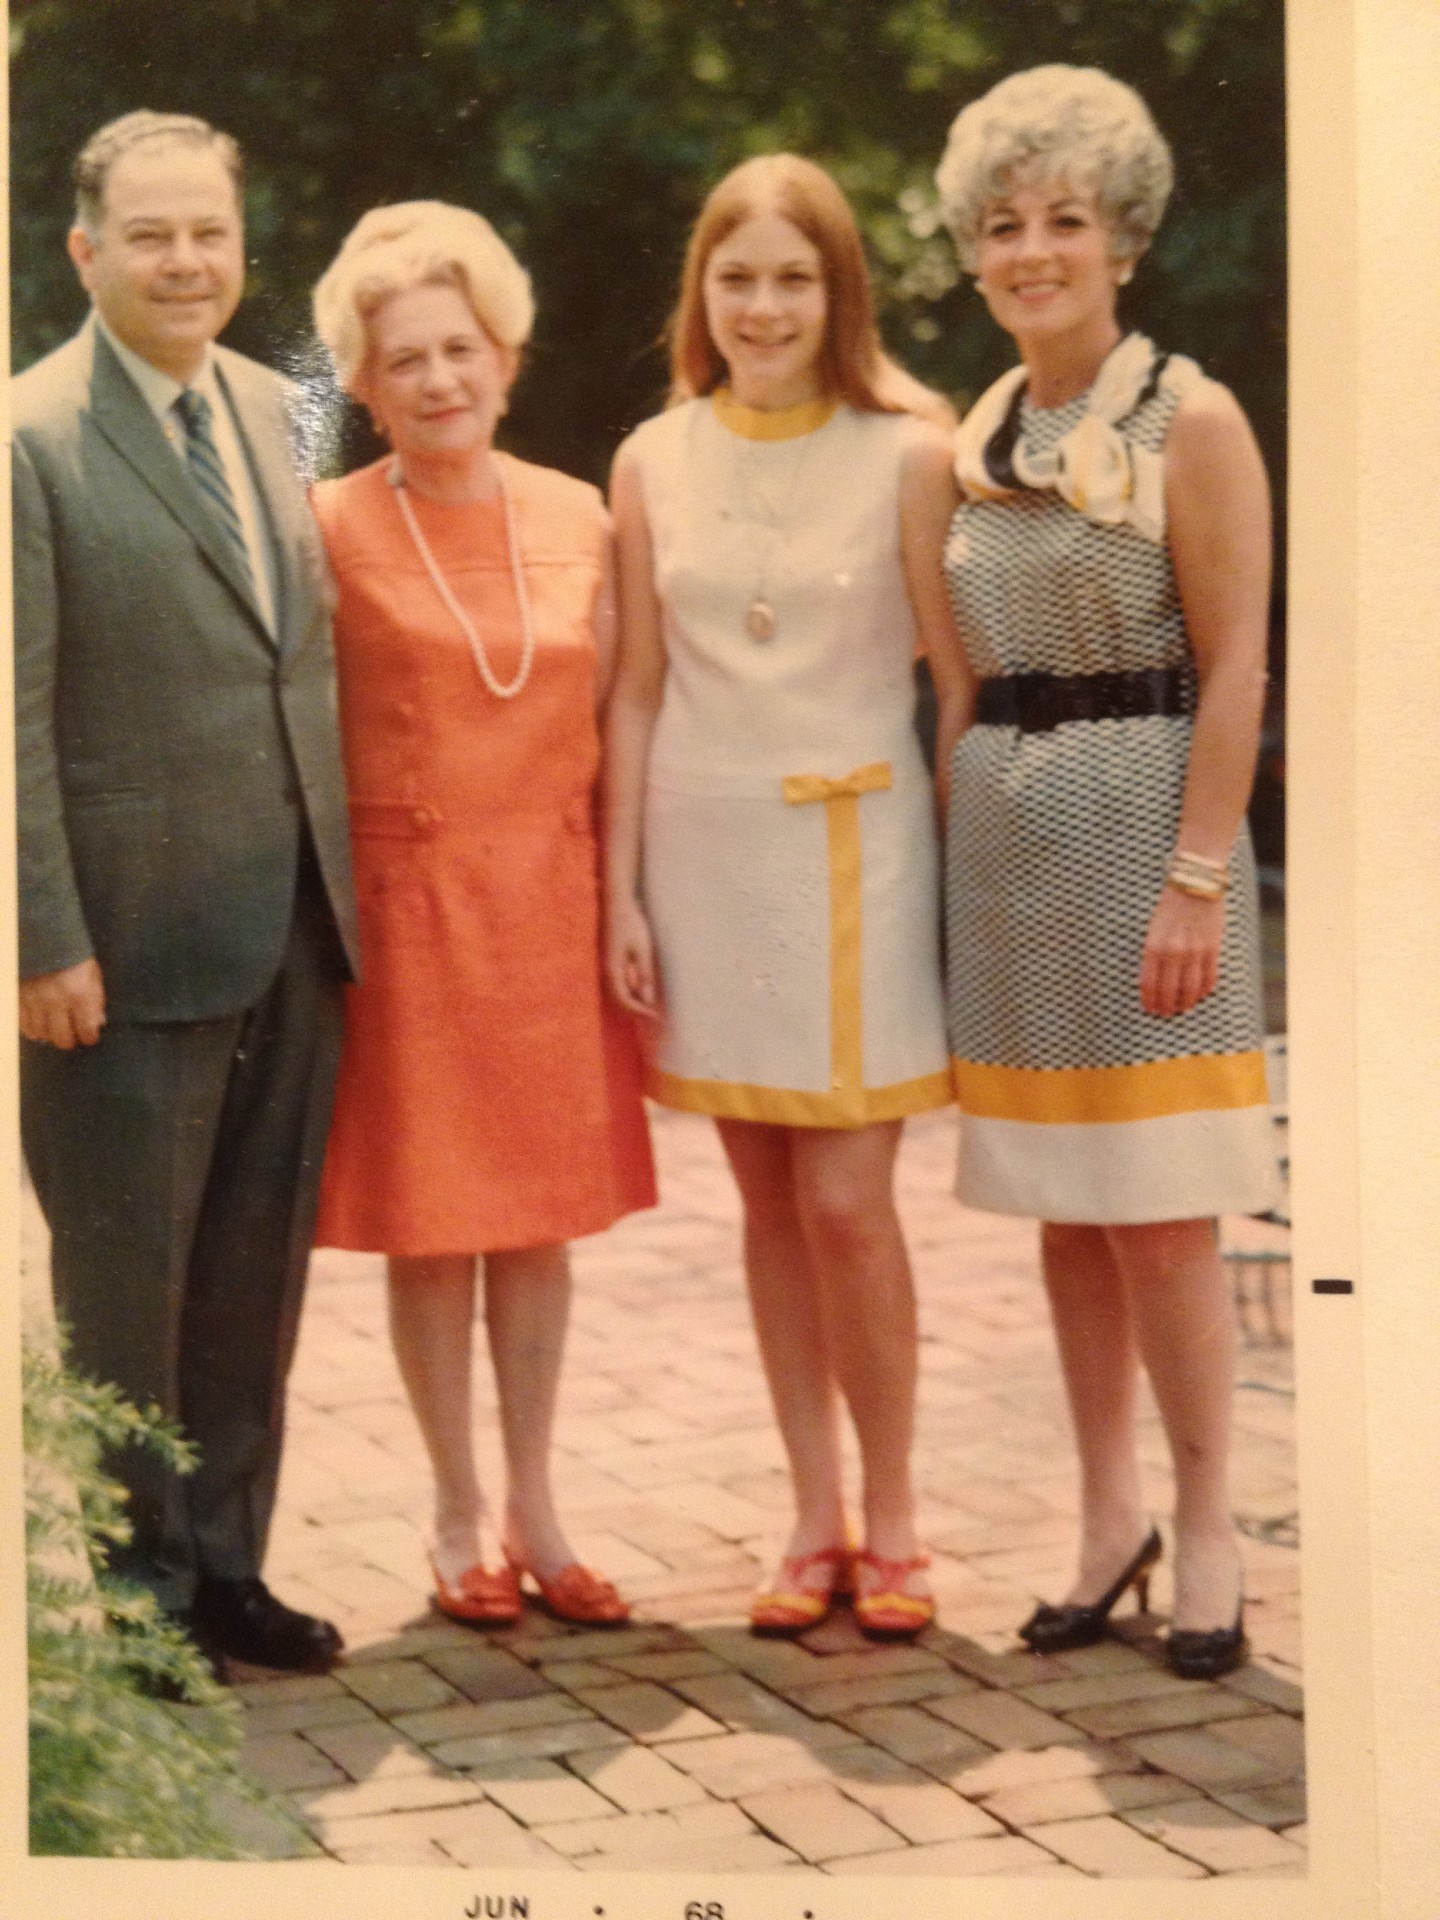 Elissa Newport in 1969 standing with 3 family members at graduation